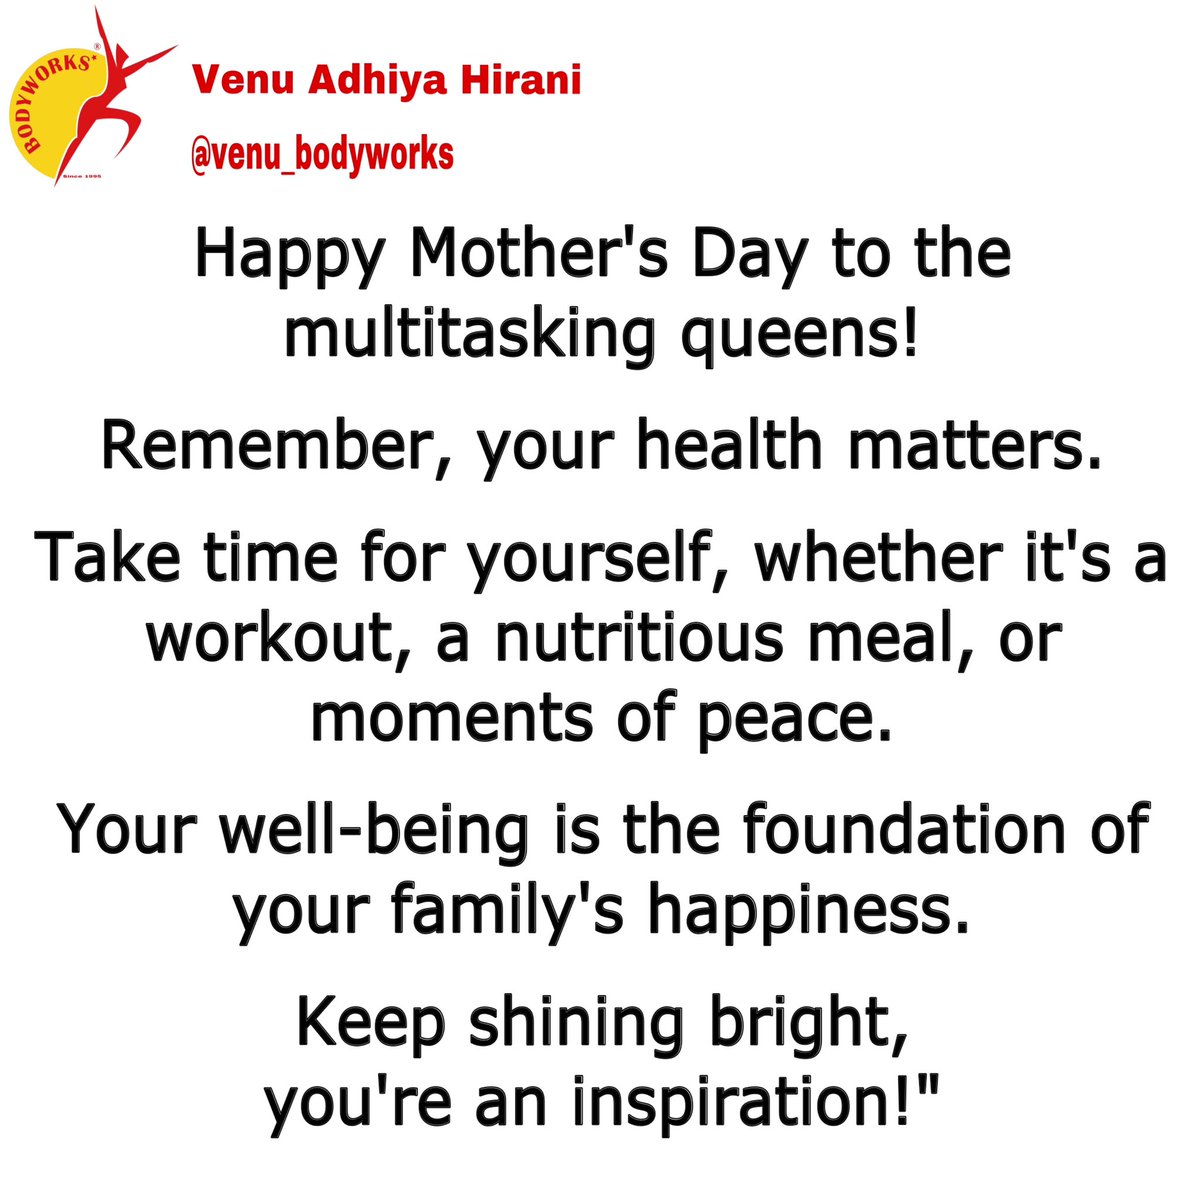 #mothersday #happymothersday #proudmom #happymom #healthymom #yourhealthmatters #selfcare #fitnessmom #fitmom #fitnessmotivations #healthylife #fitat50